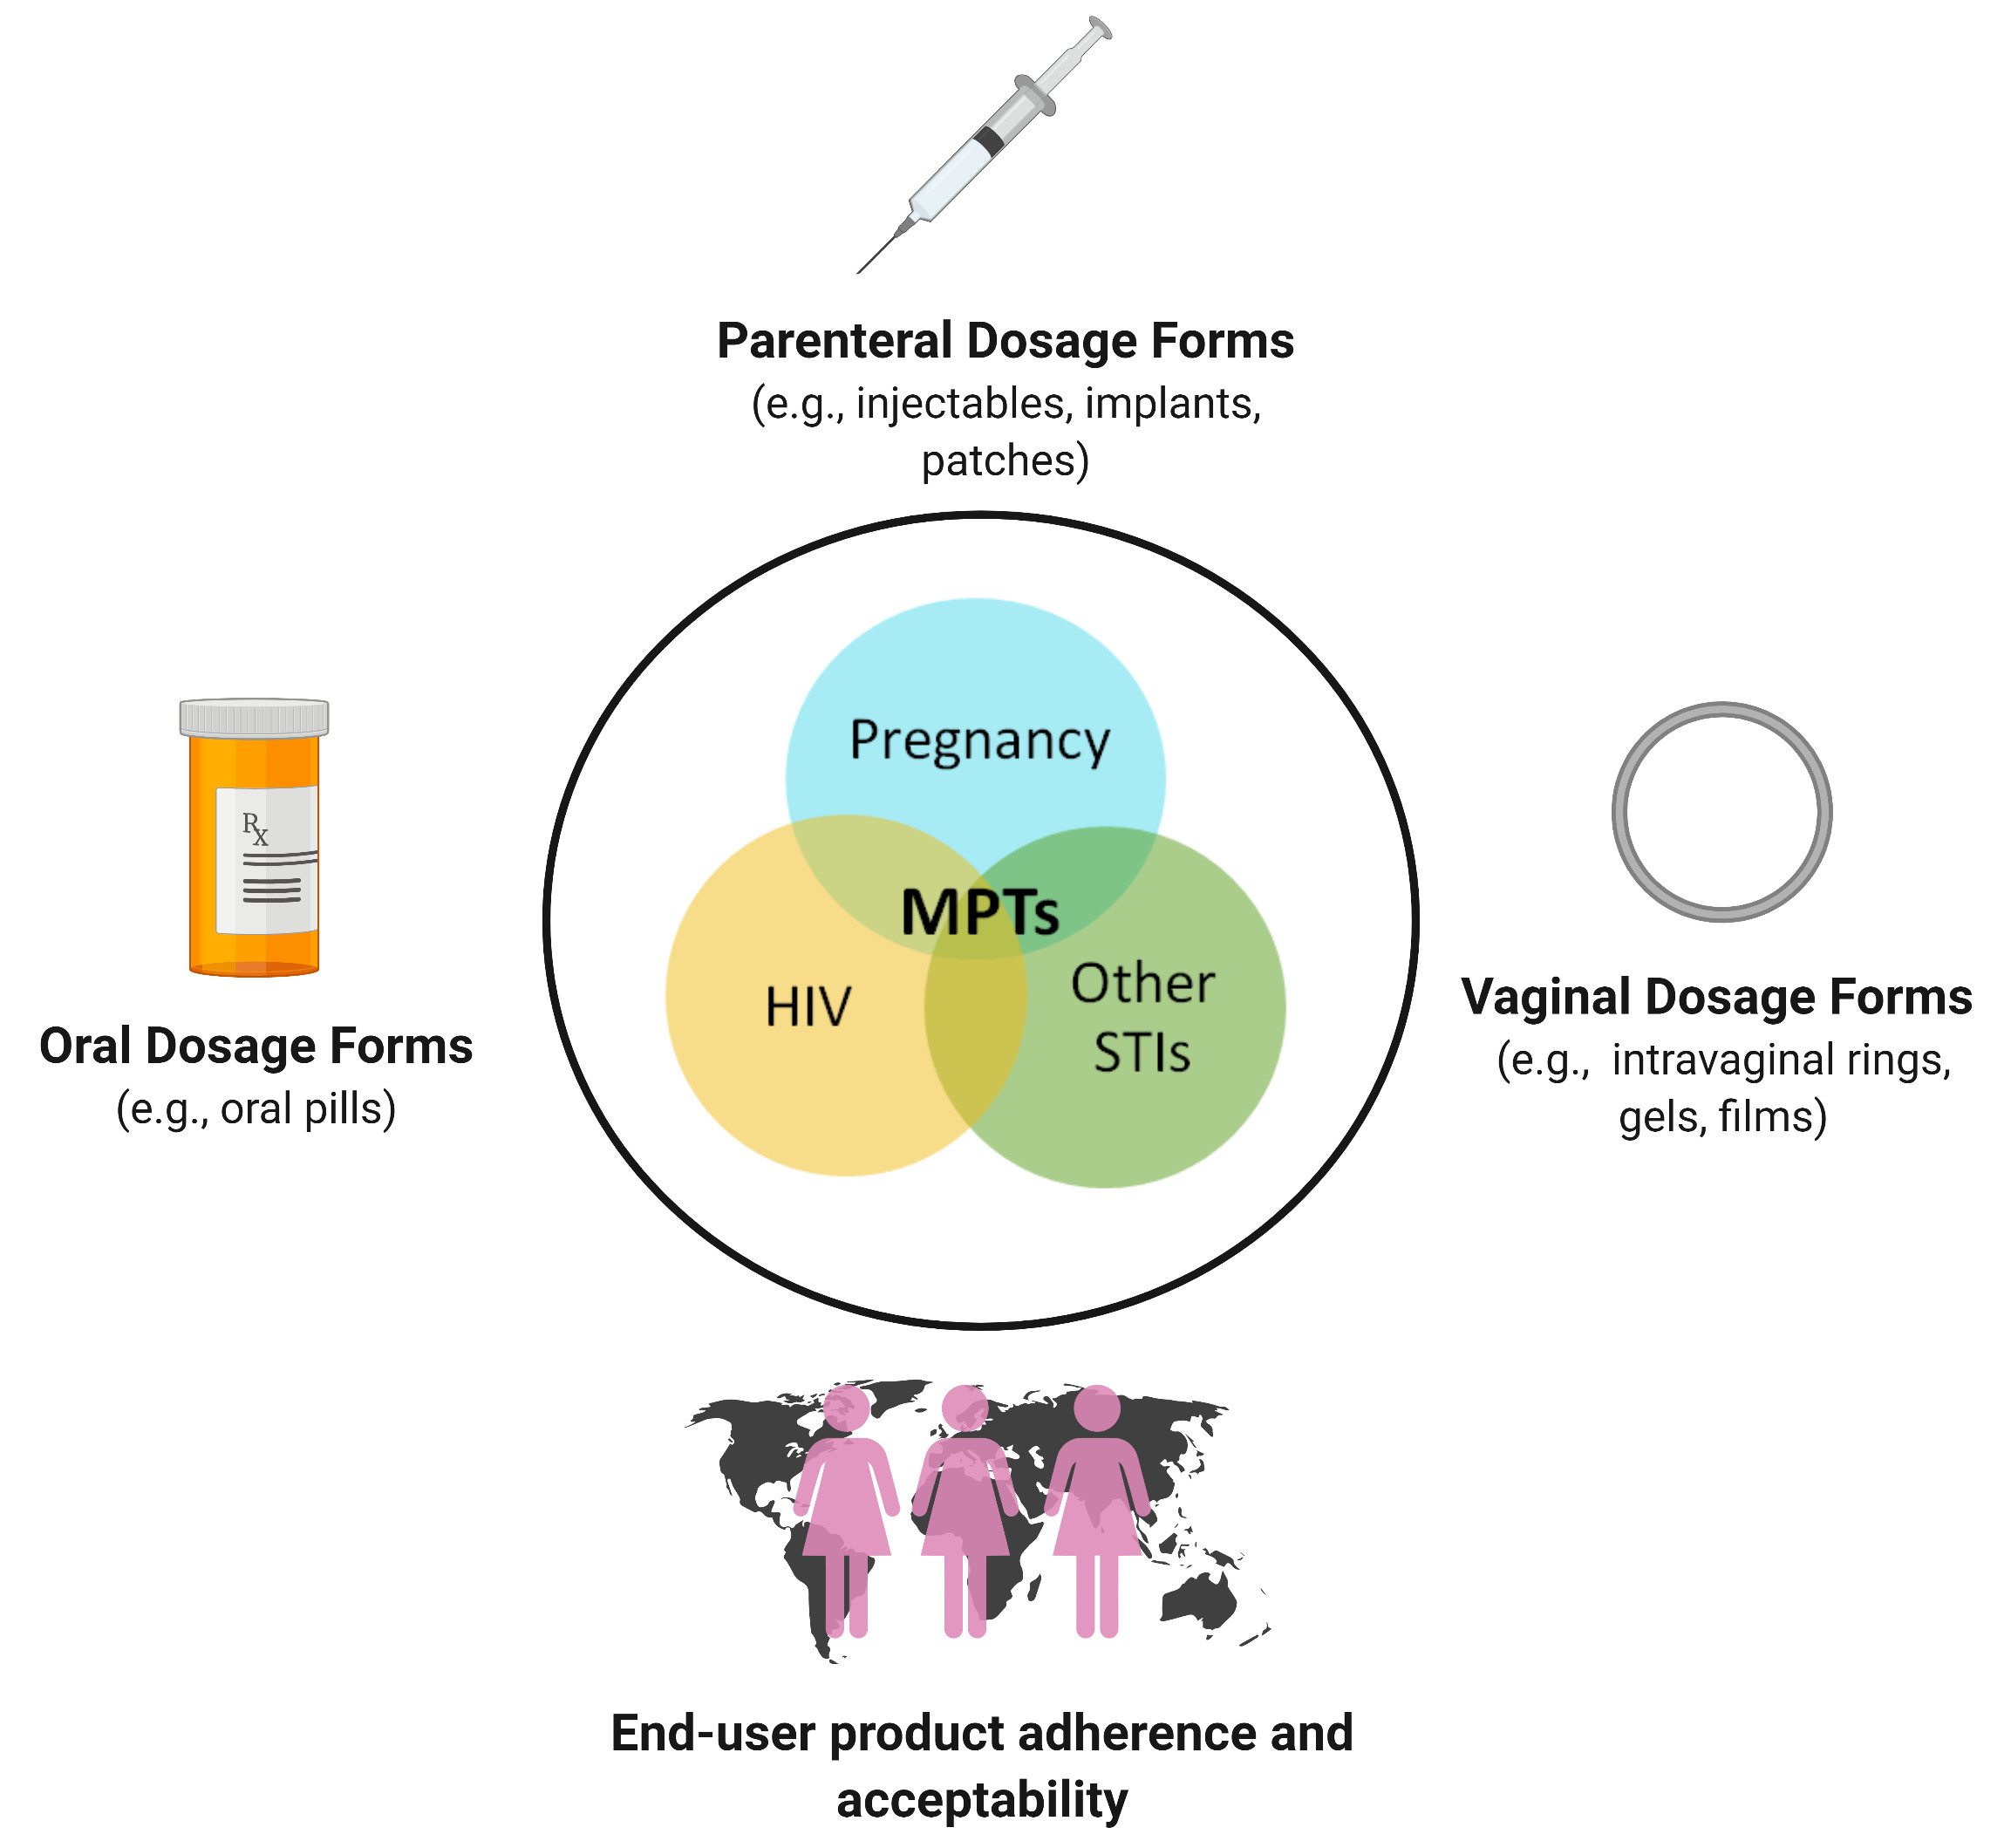 Polymers Free Full-Text Multipurpose Prevention Technologies Oral, Parenteral, and Vaginal Dosage Forms for Prevention of HIV/STIs and Unplanned Pregnancy image